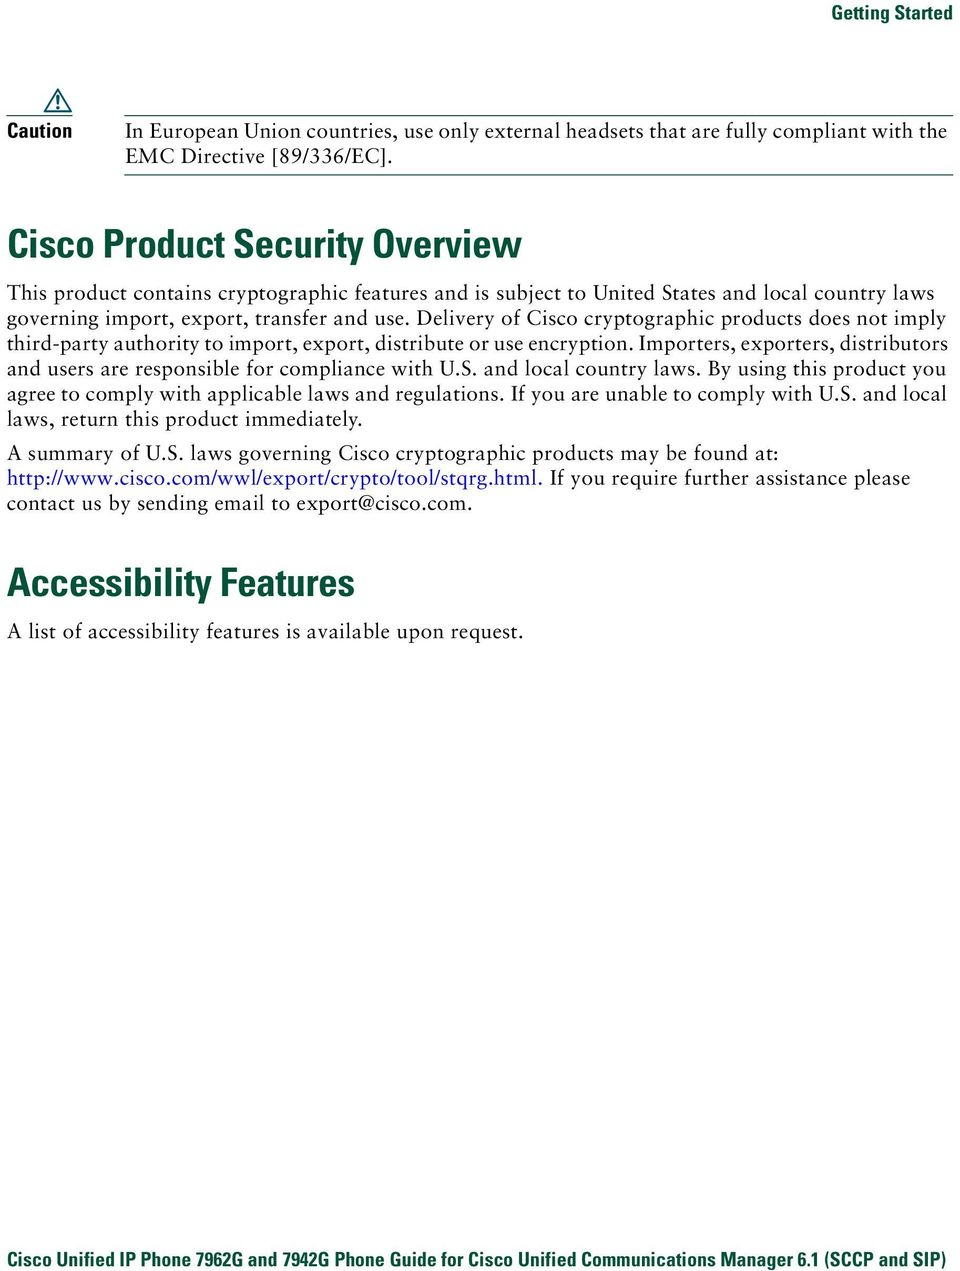 Delivery of Cisco cryptographic products does not imply third-party authority to import, export, distribute or use encryption.